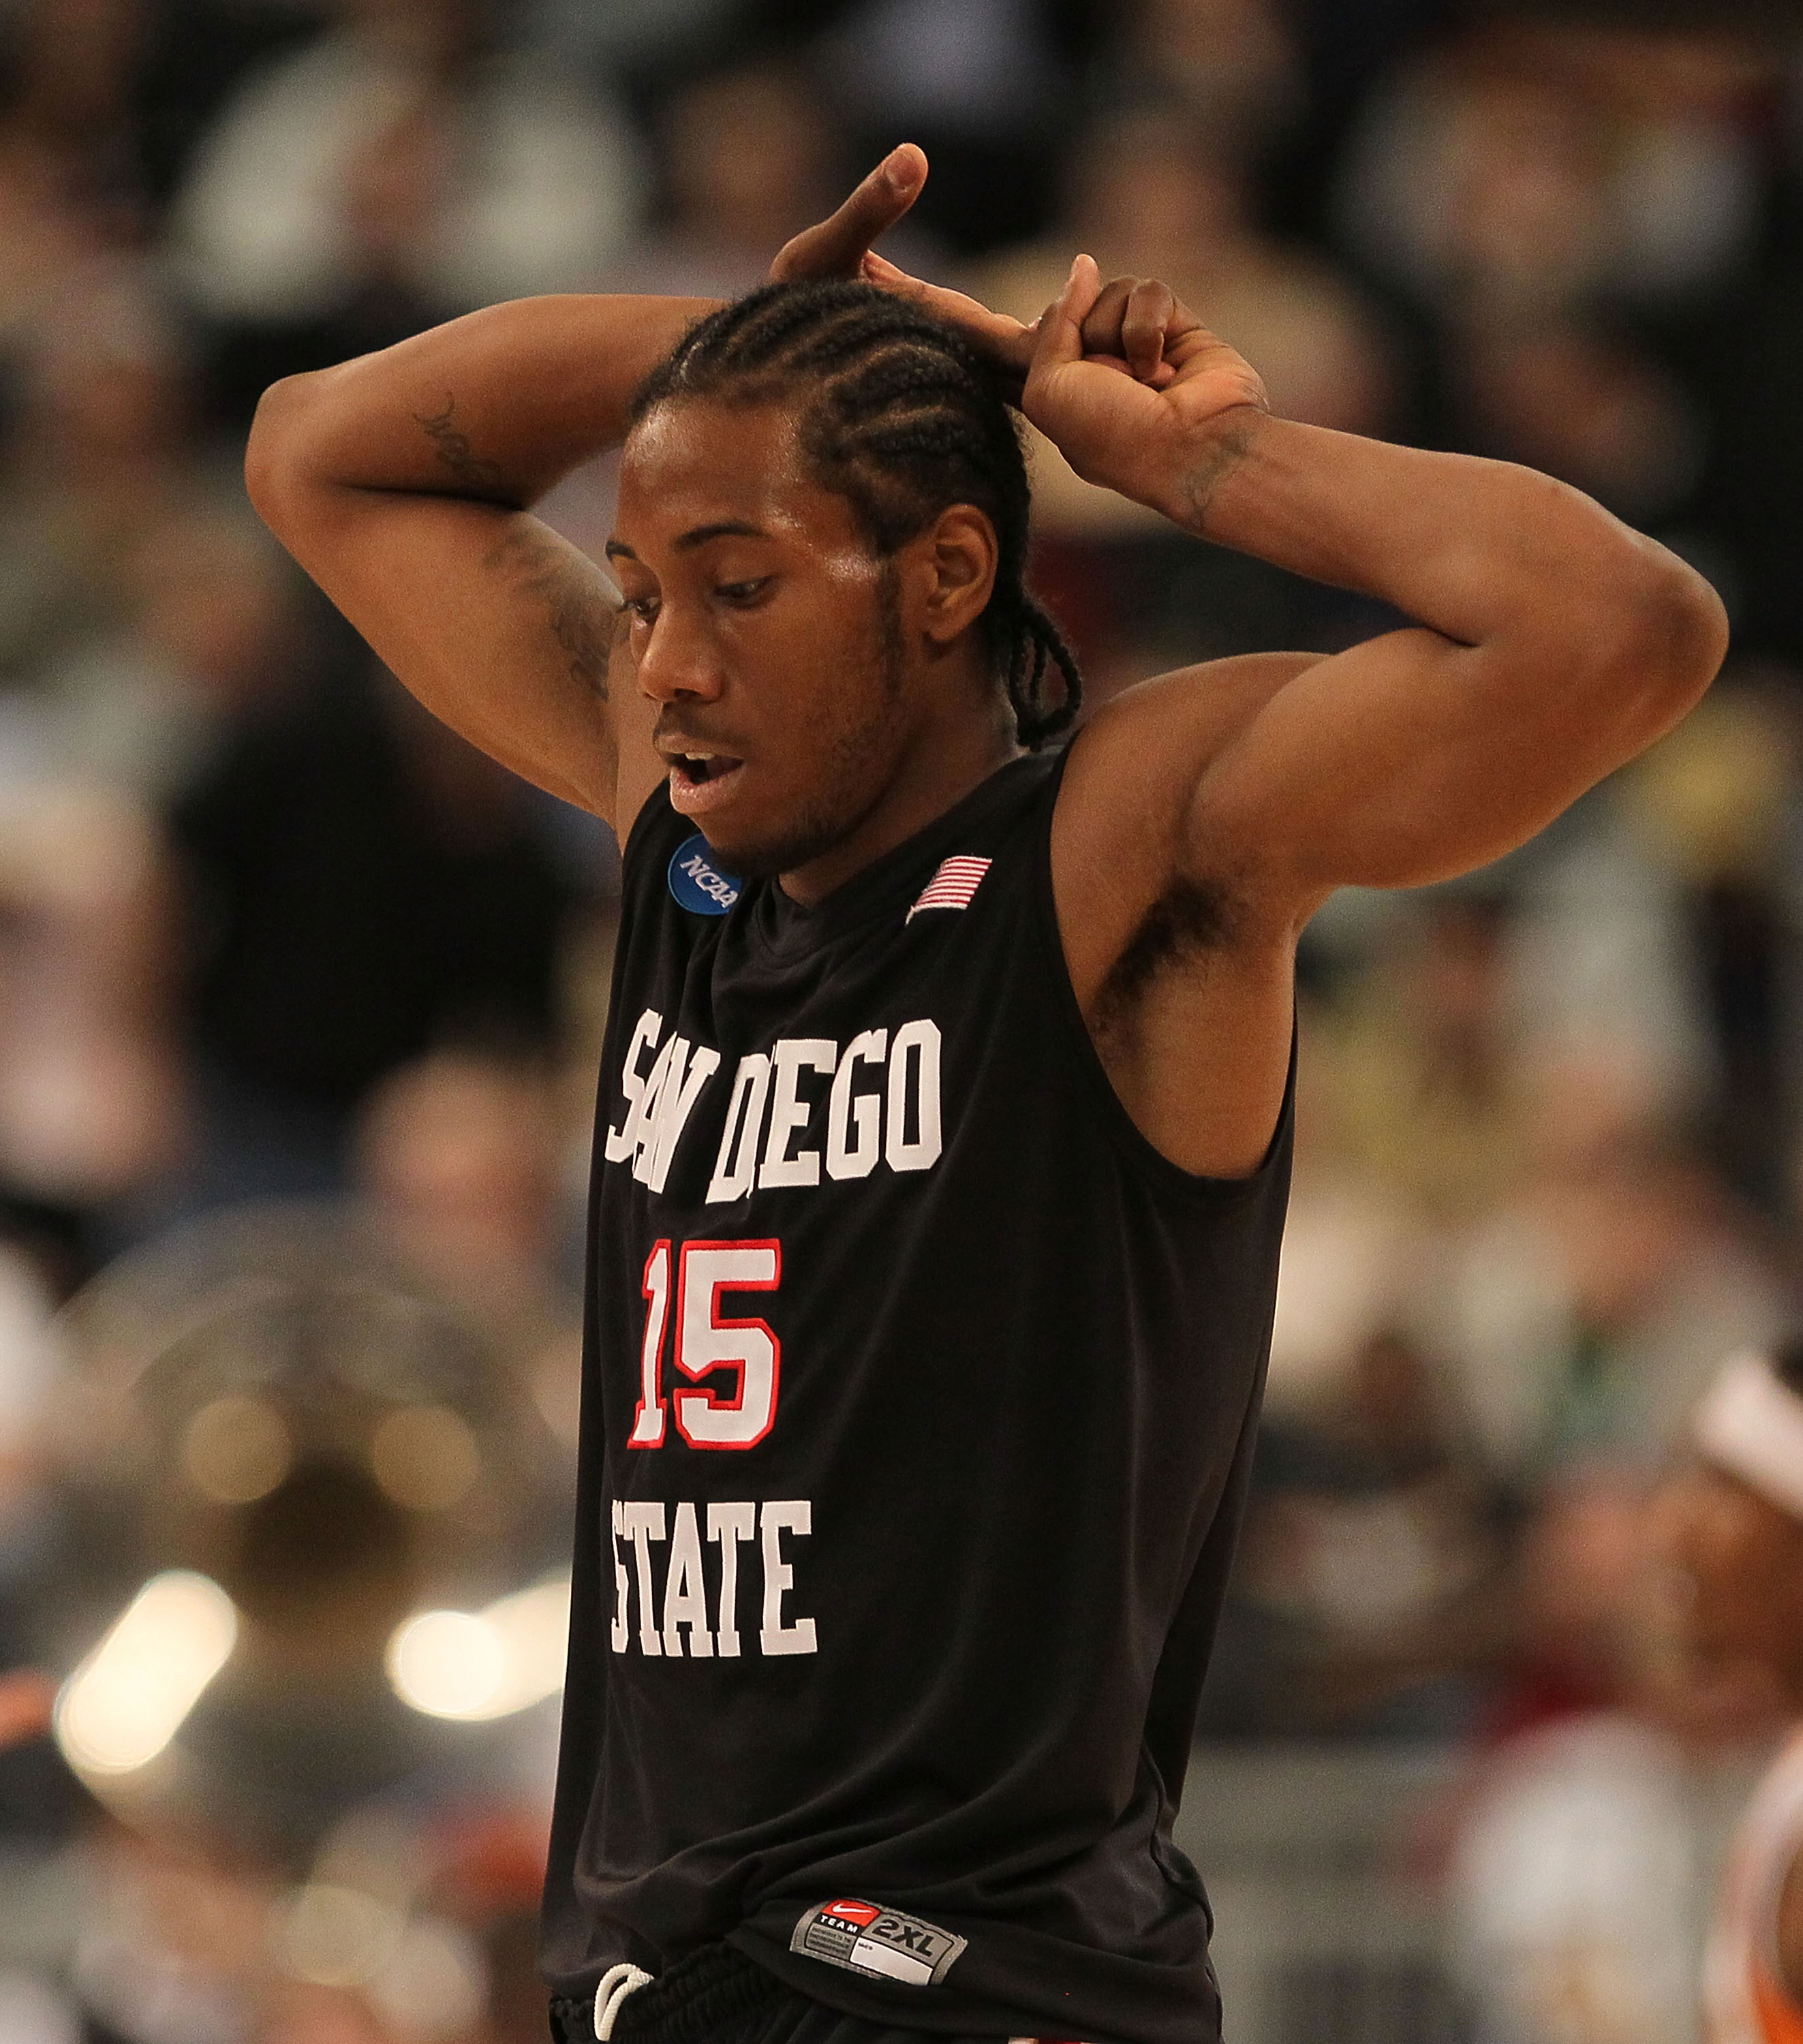 PROVIDENCE, RI - MARCH 18:  Kawhi Leonard #15 of the San Diego State Axtecs reacts against the Tennessee Volunteers during the first round of the 2010 NCAA men's basketball tournament at Dunkin' Donuts Center on March 18, 2010 in Providence, Rhode Island.